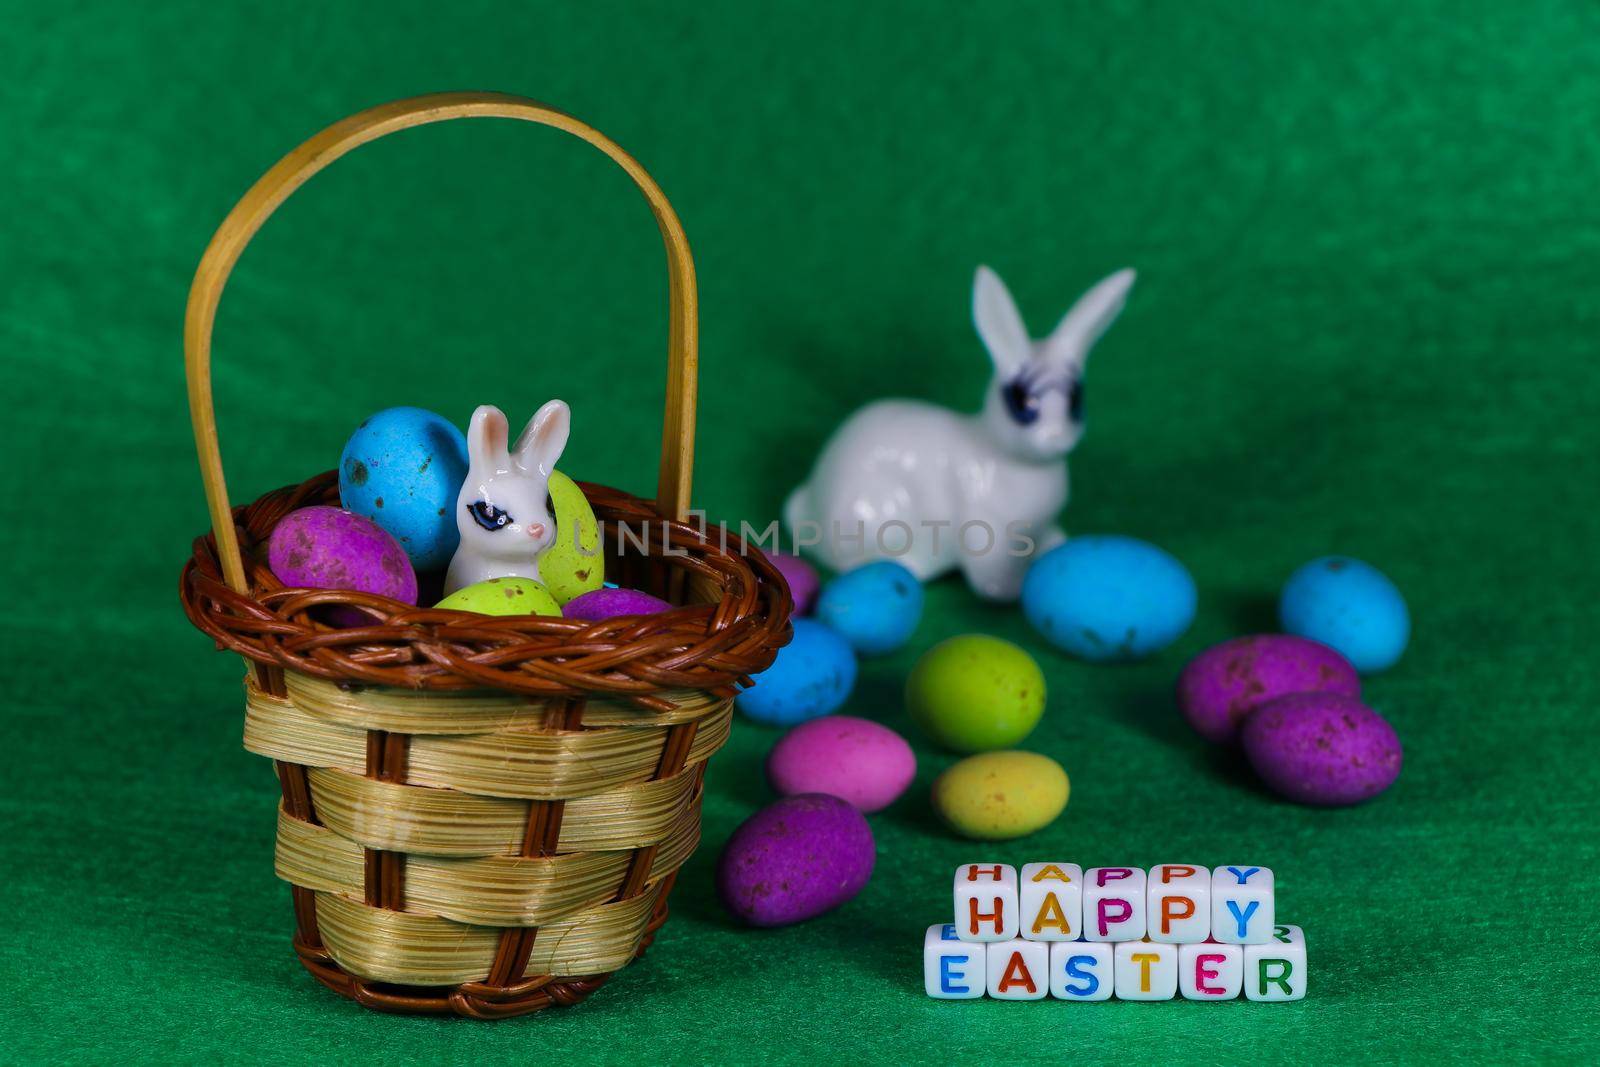 Happy Easter text beads with bunny in woven basket and colorful speckled eggs on green